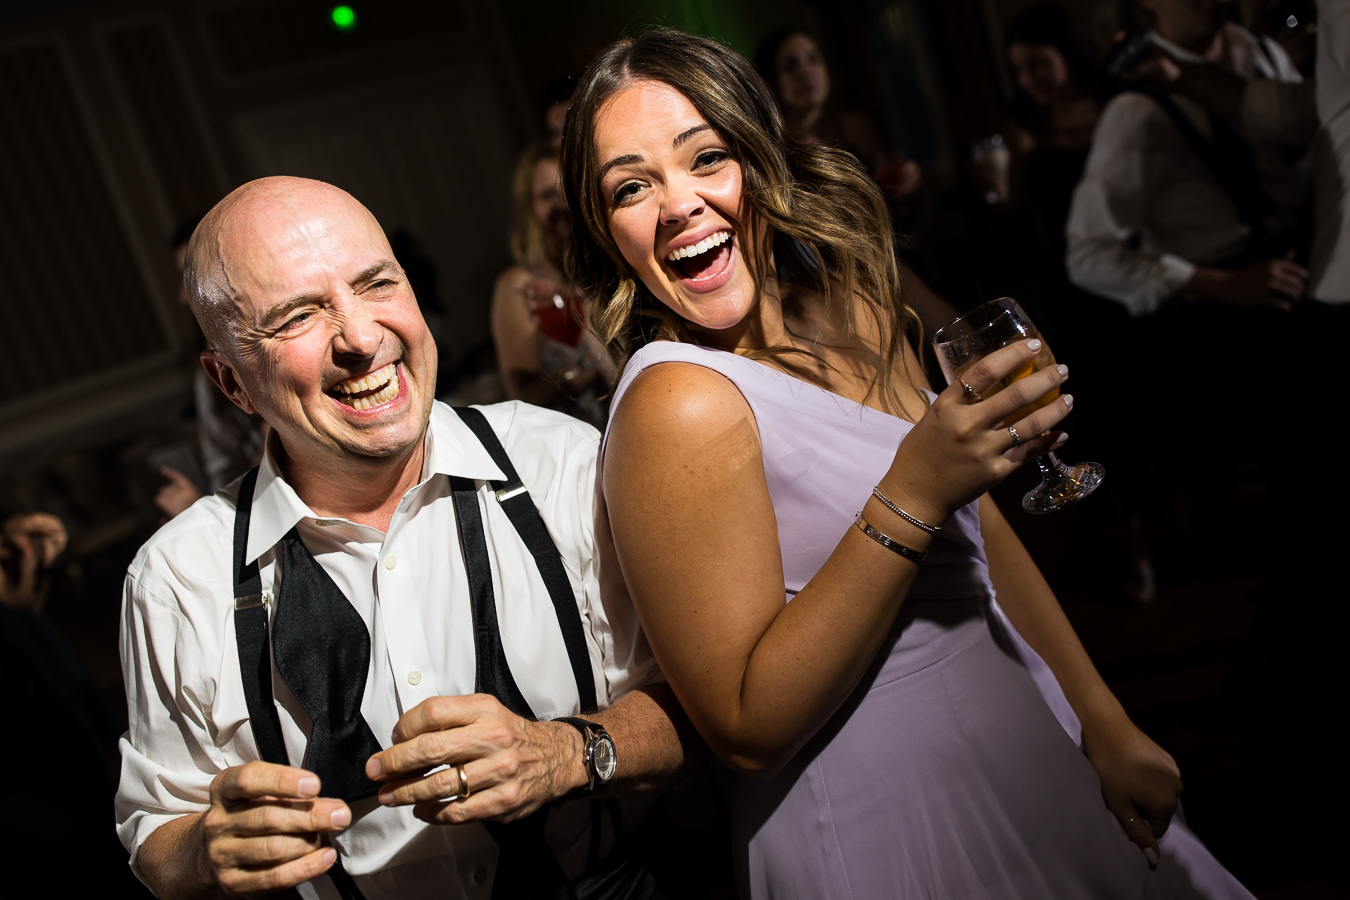 image of the dad and a bridesmaid dancing together 